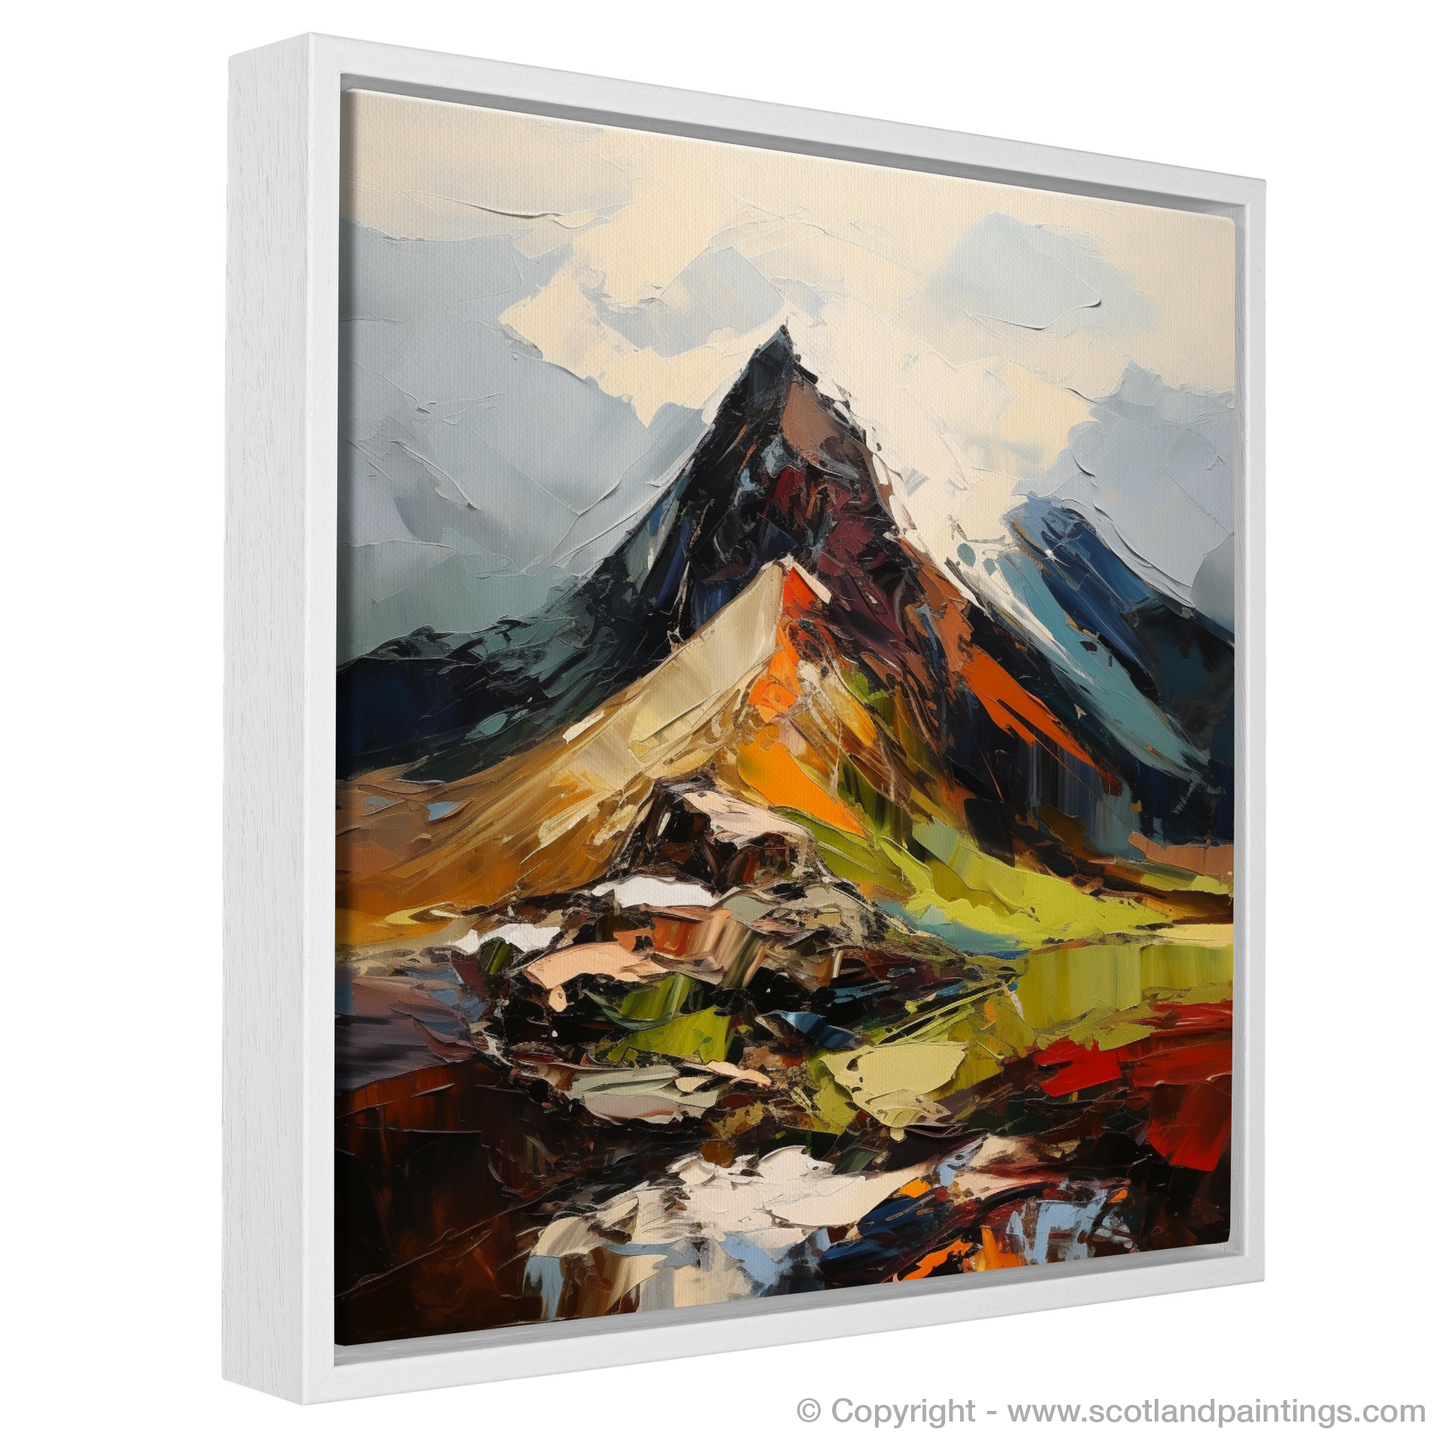 Painting and Art Print of Cairn Gorm, Highlands entitled "Cairn Gorm Unleashed: An Expressionist Ode to the Highlands".